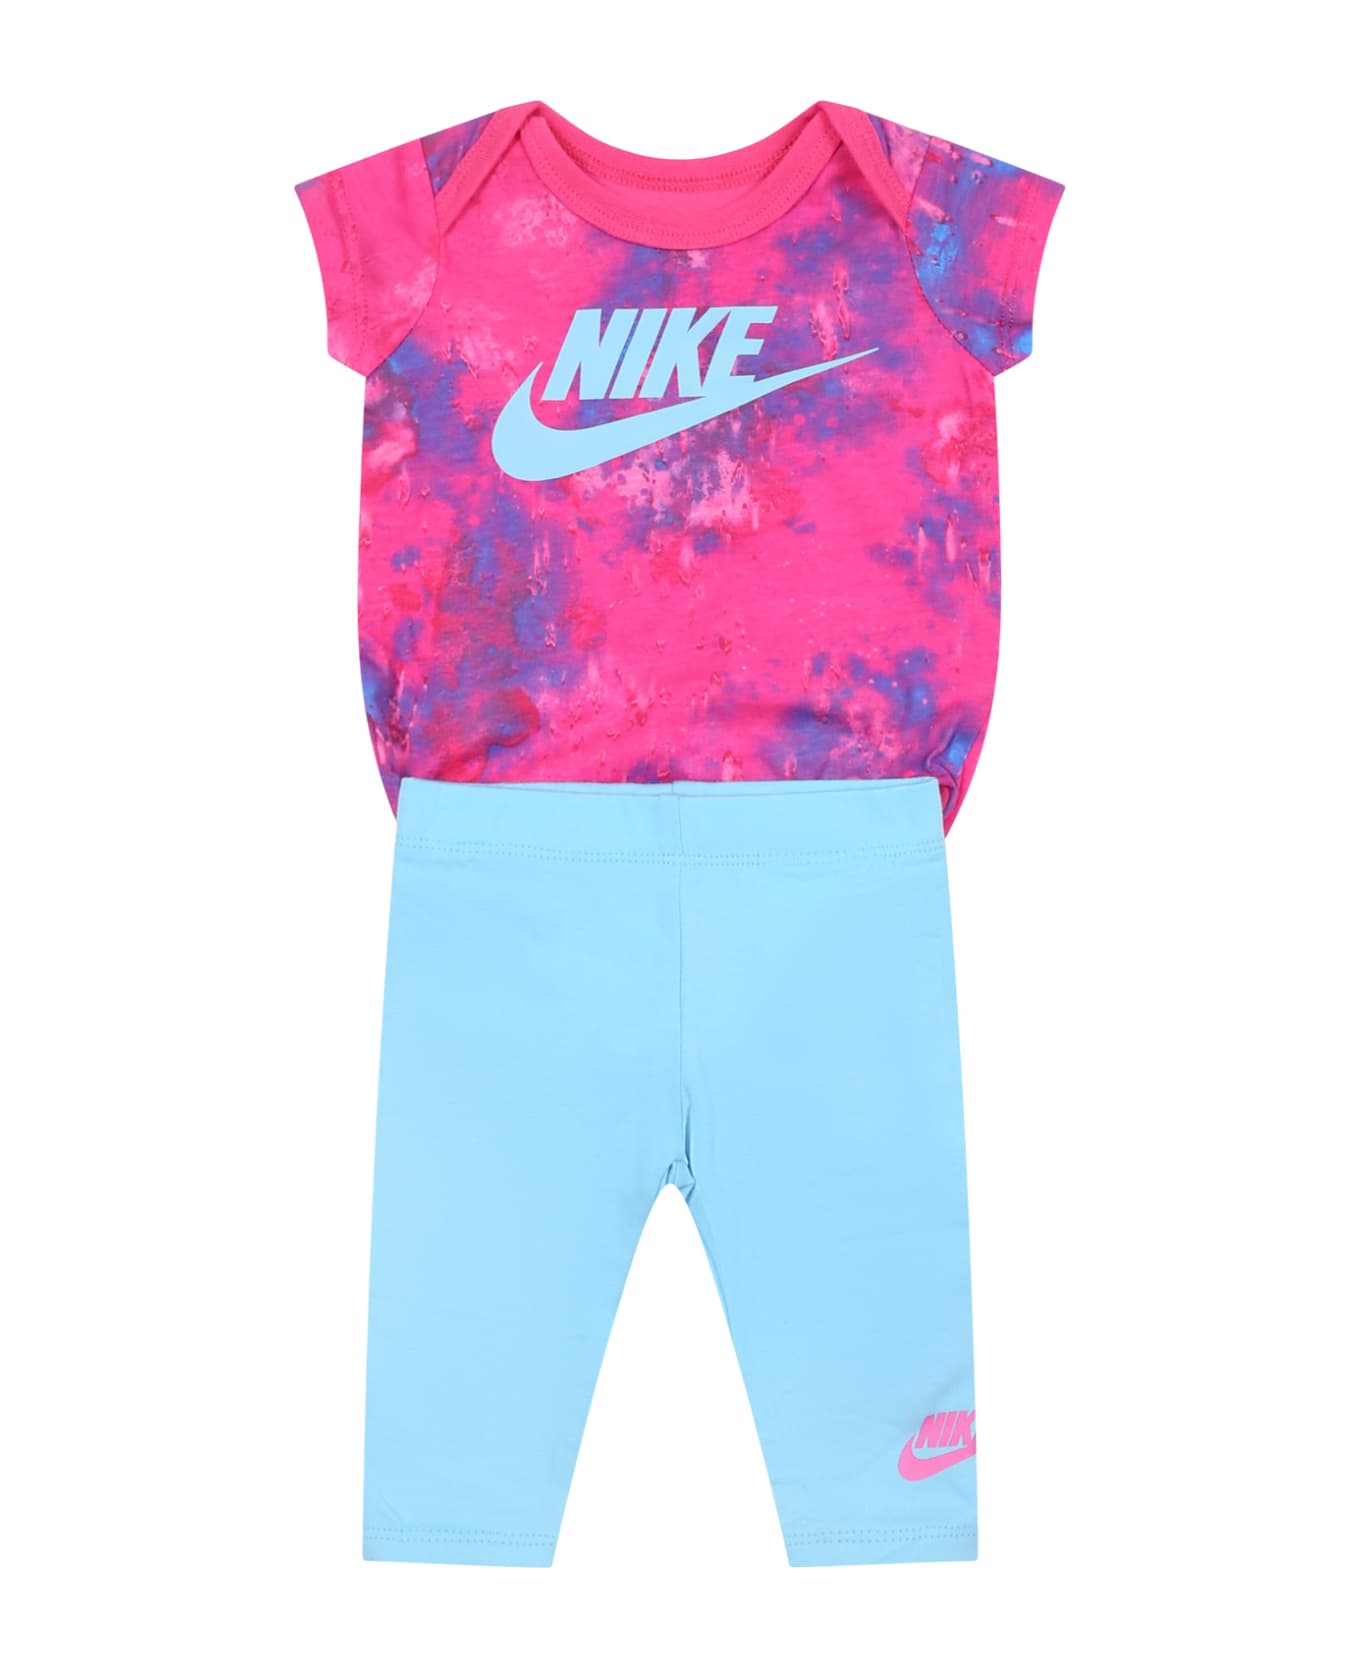 Nike Fuchsia Suit For Baby Girl With Swoosh - Multicolor ボトムス